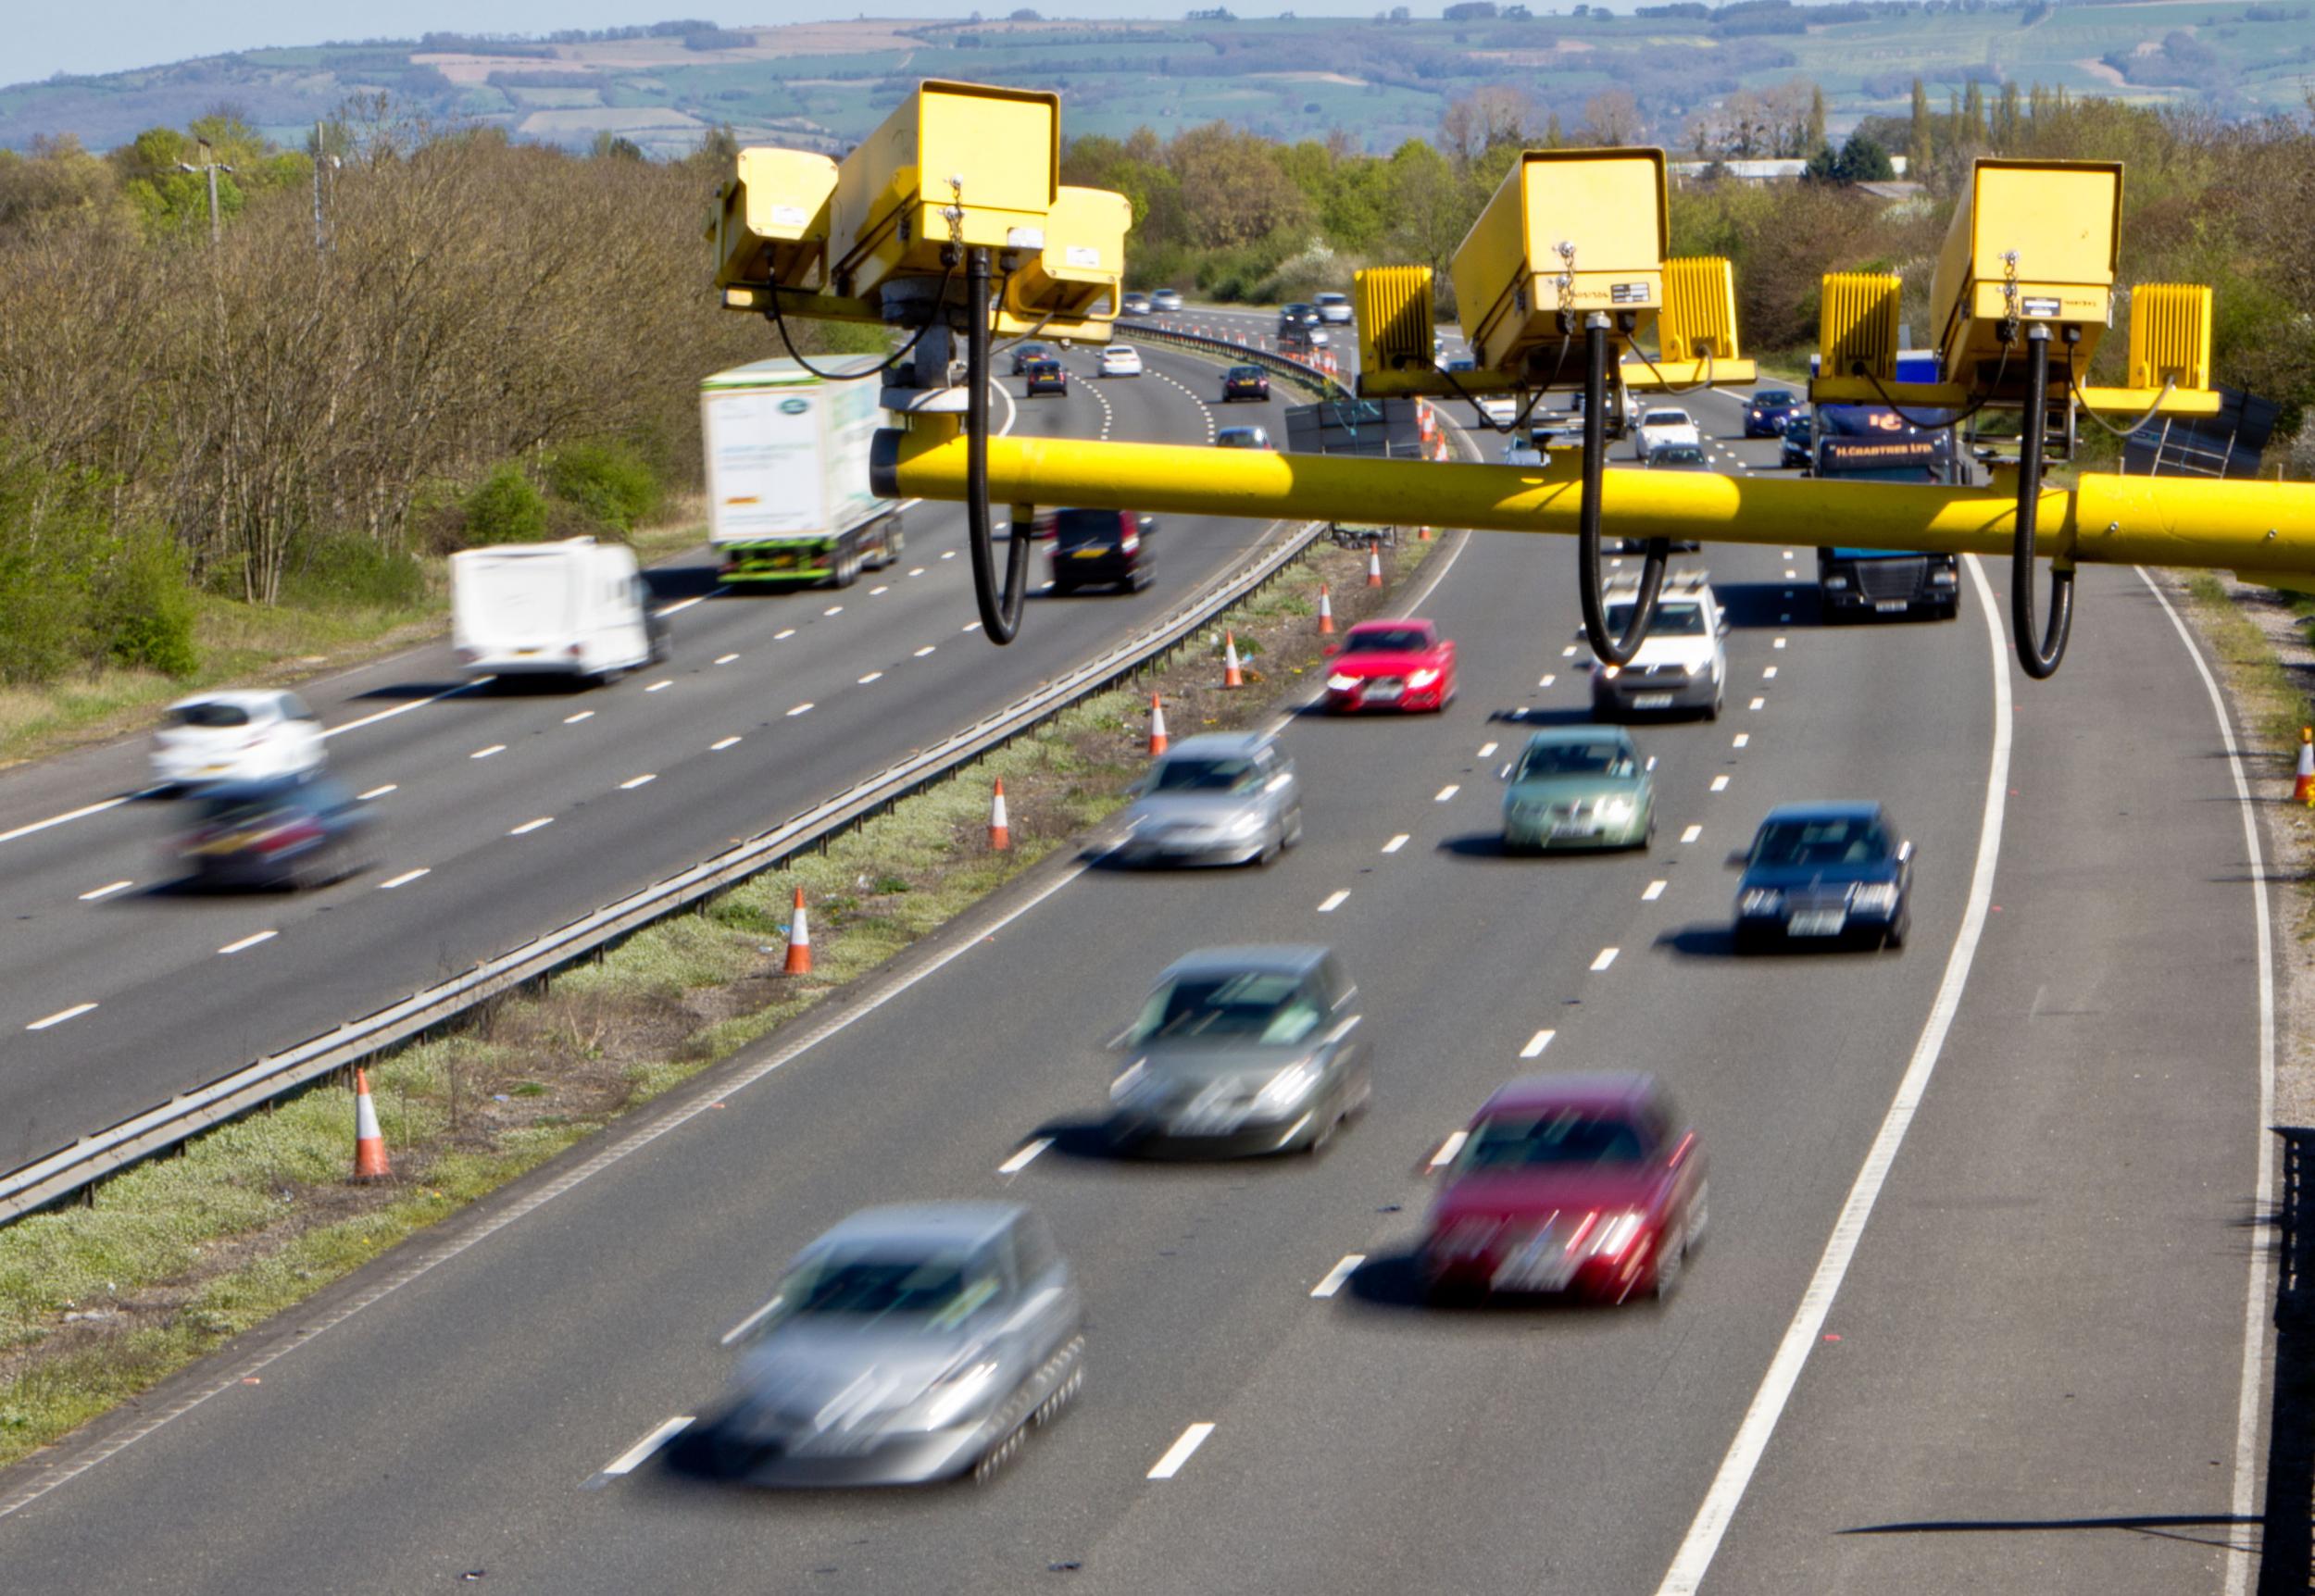 Some of the highest speeds recorded were 163mph on a 70mph road and 134mph on a 40mph road